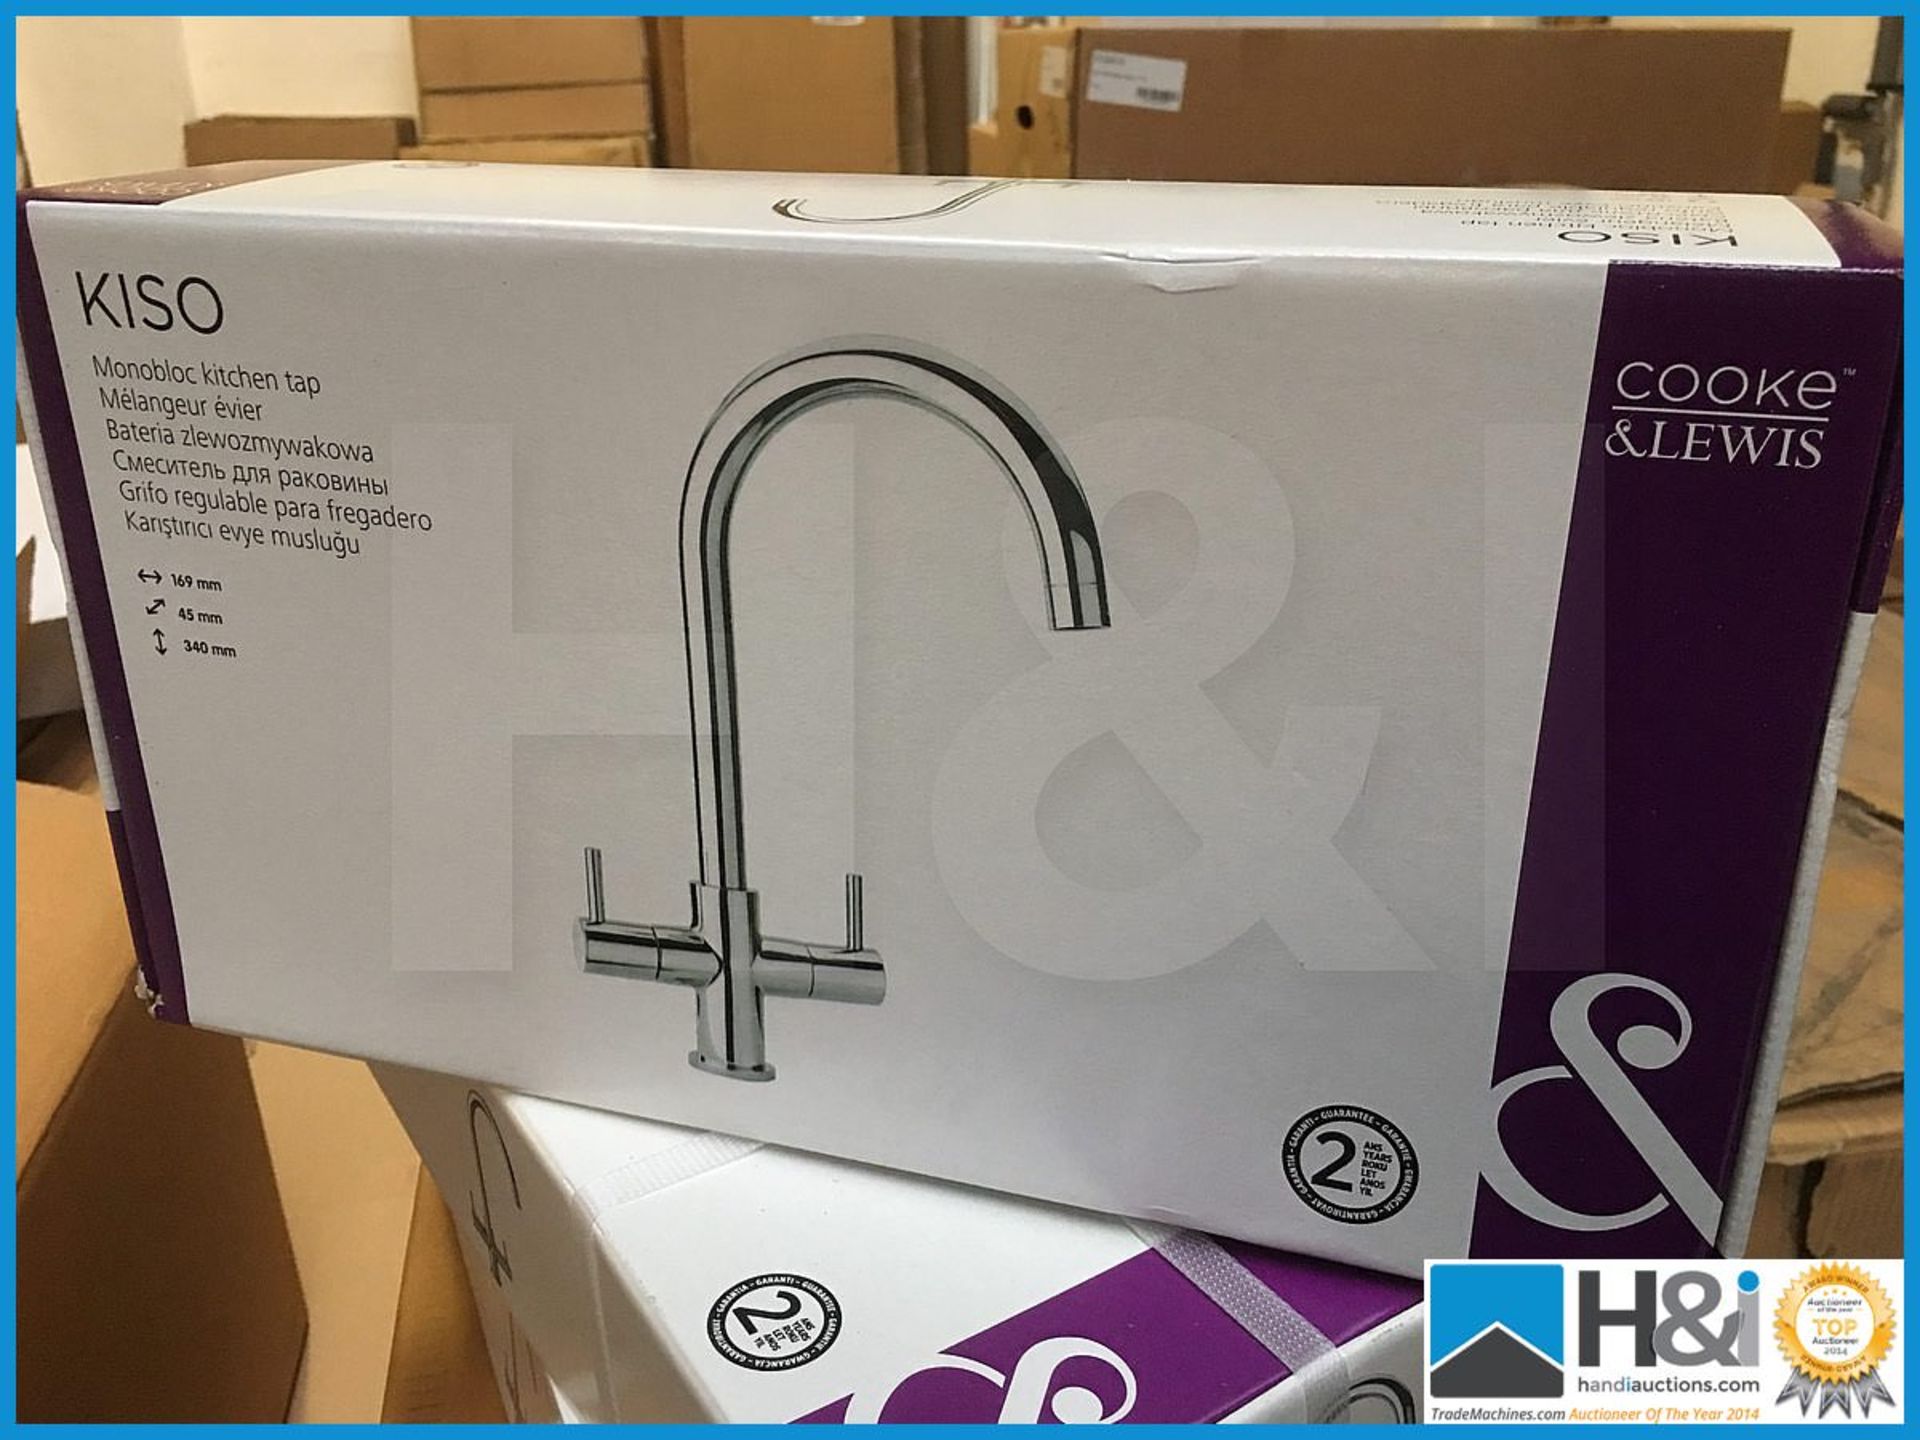 Stunning designer Cooke and Lewis Kiso mono kitchen tap. New and Boxed. Suggested manufacturers